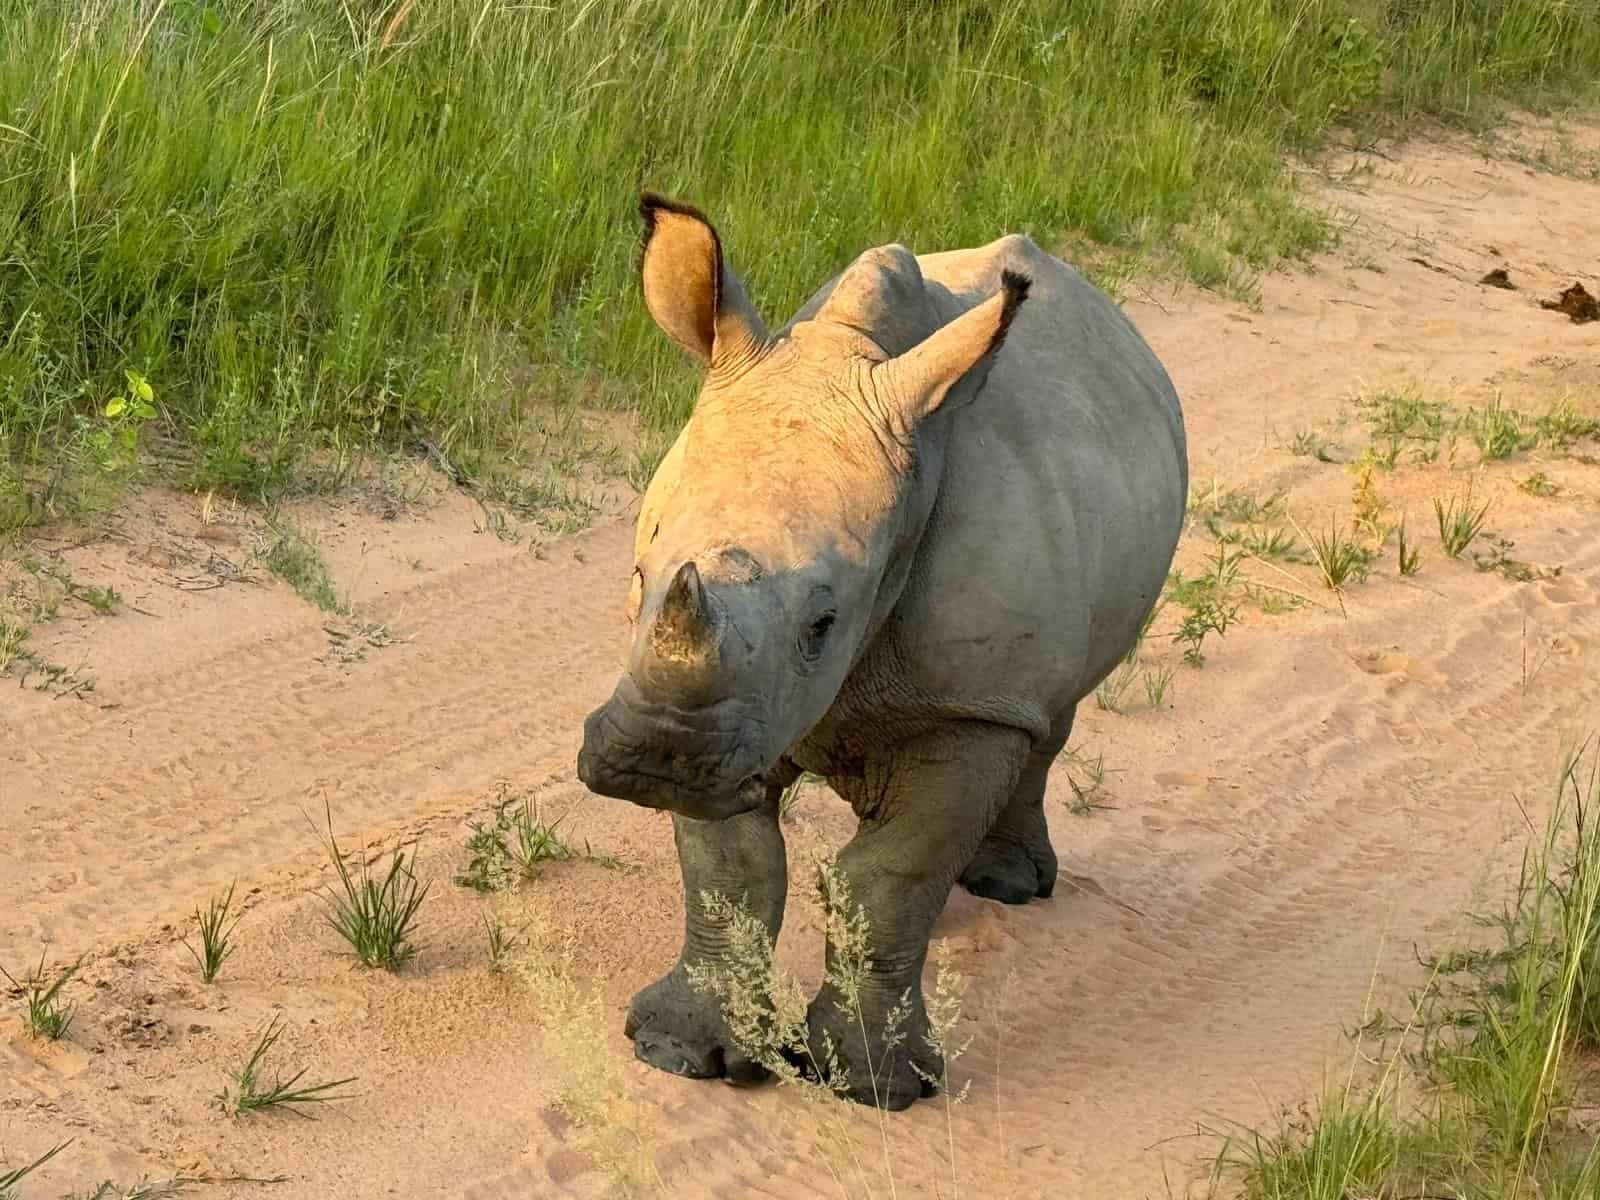 I did WHAT to a Rhino?